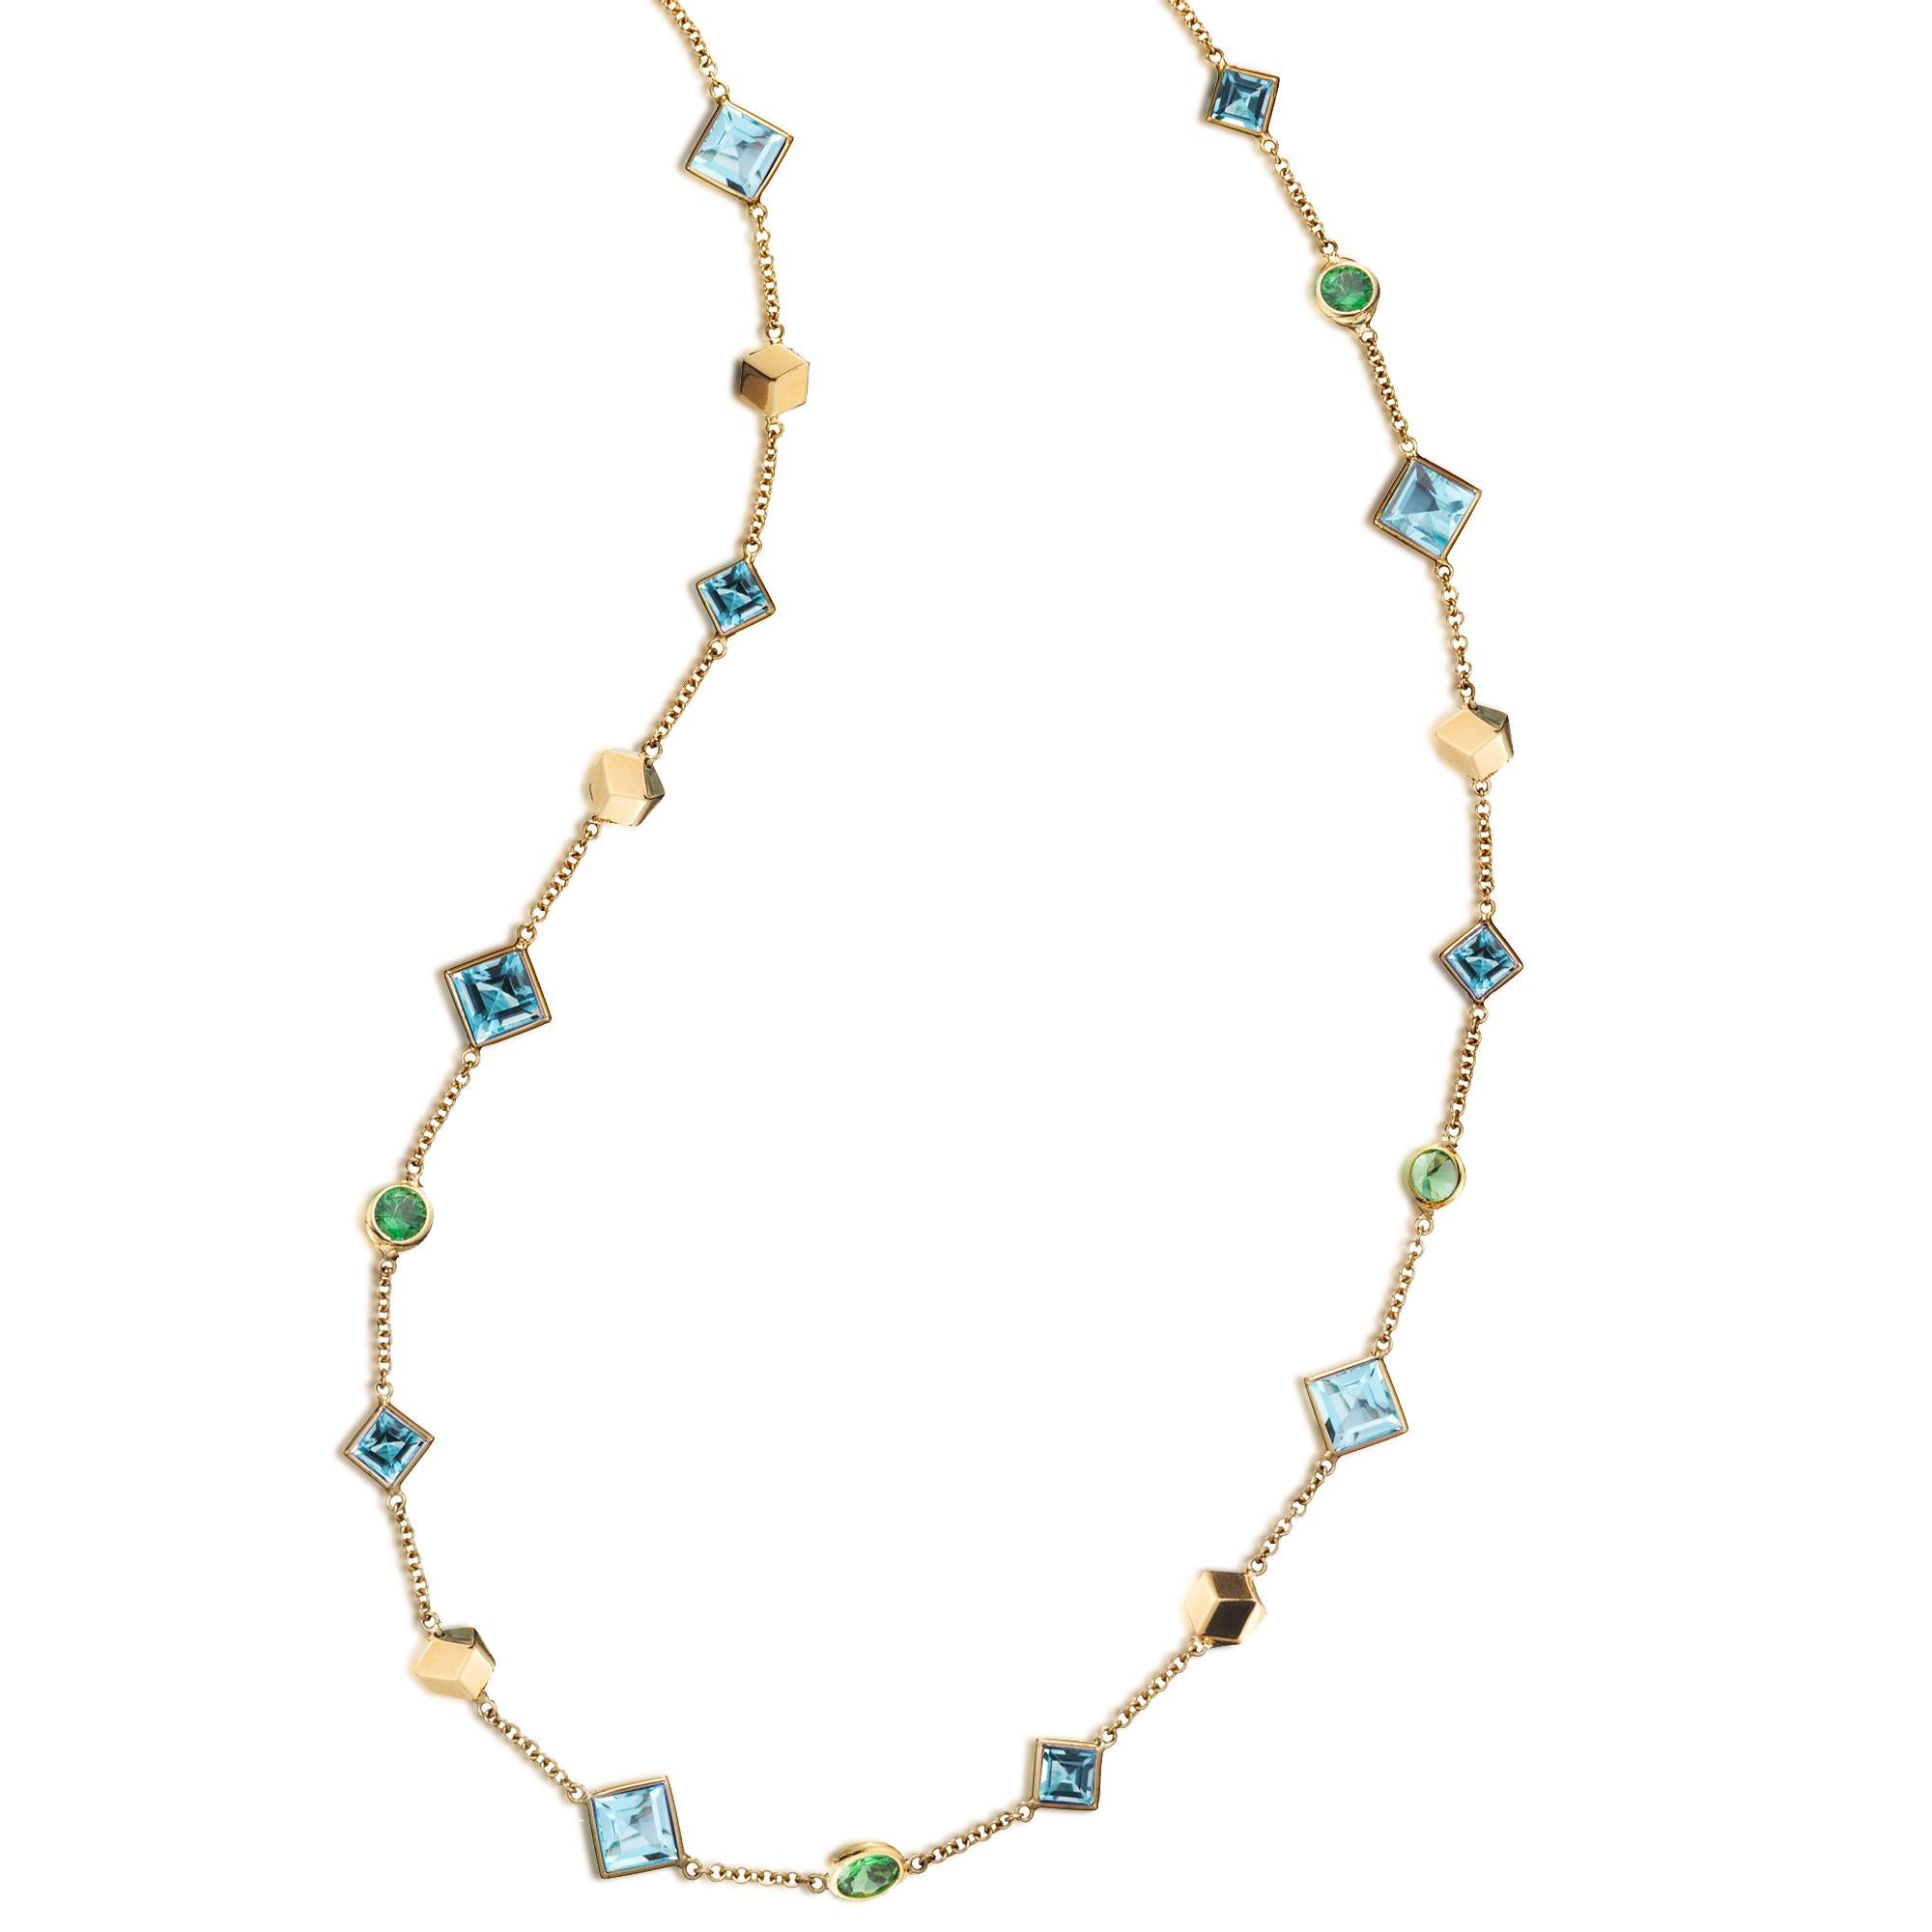 18kt yellow gold Florentine sautoir necklace with bezel set emerald-cut blue topaz and oval tsavorite garnets, and signature Brillante® motif.

Inspired by the Garden of the Iris, the Florentine collection pairs bold color combinations of geometric